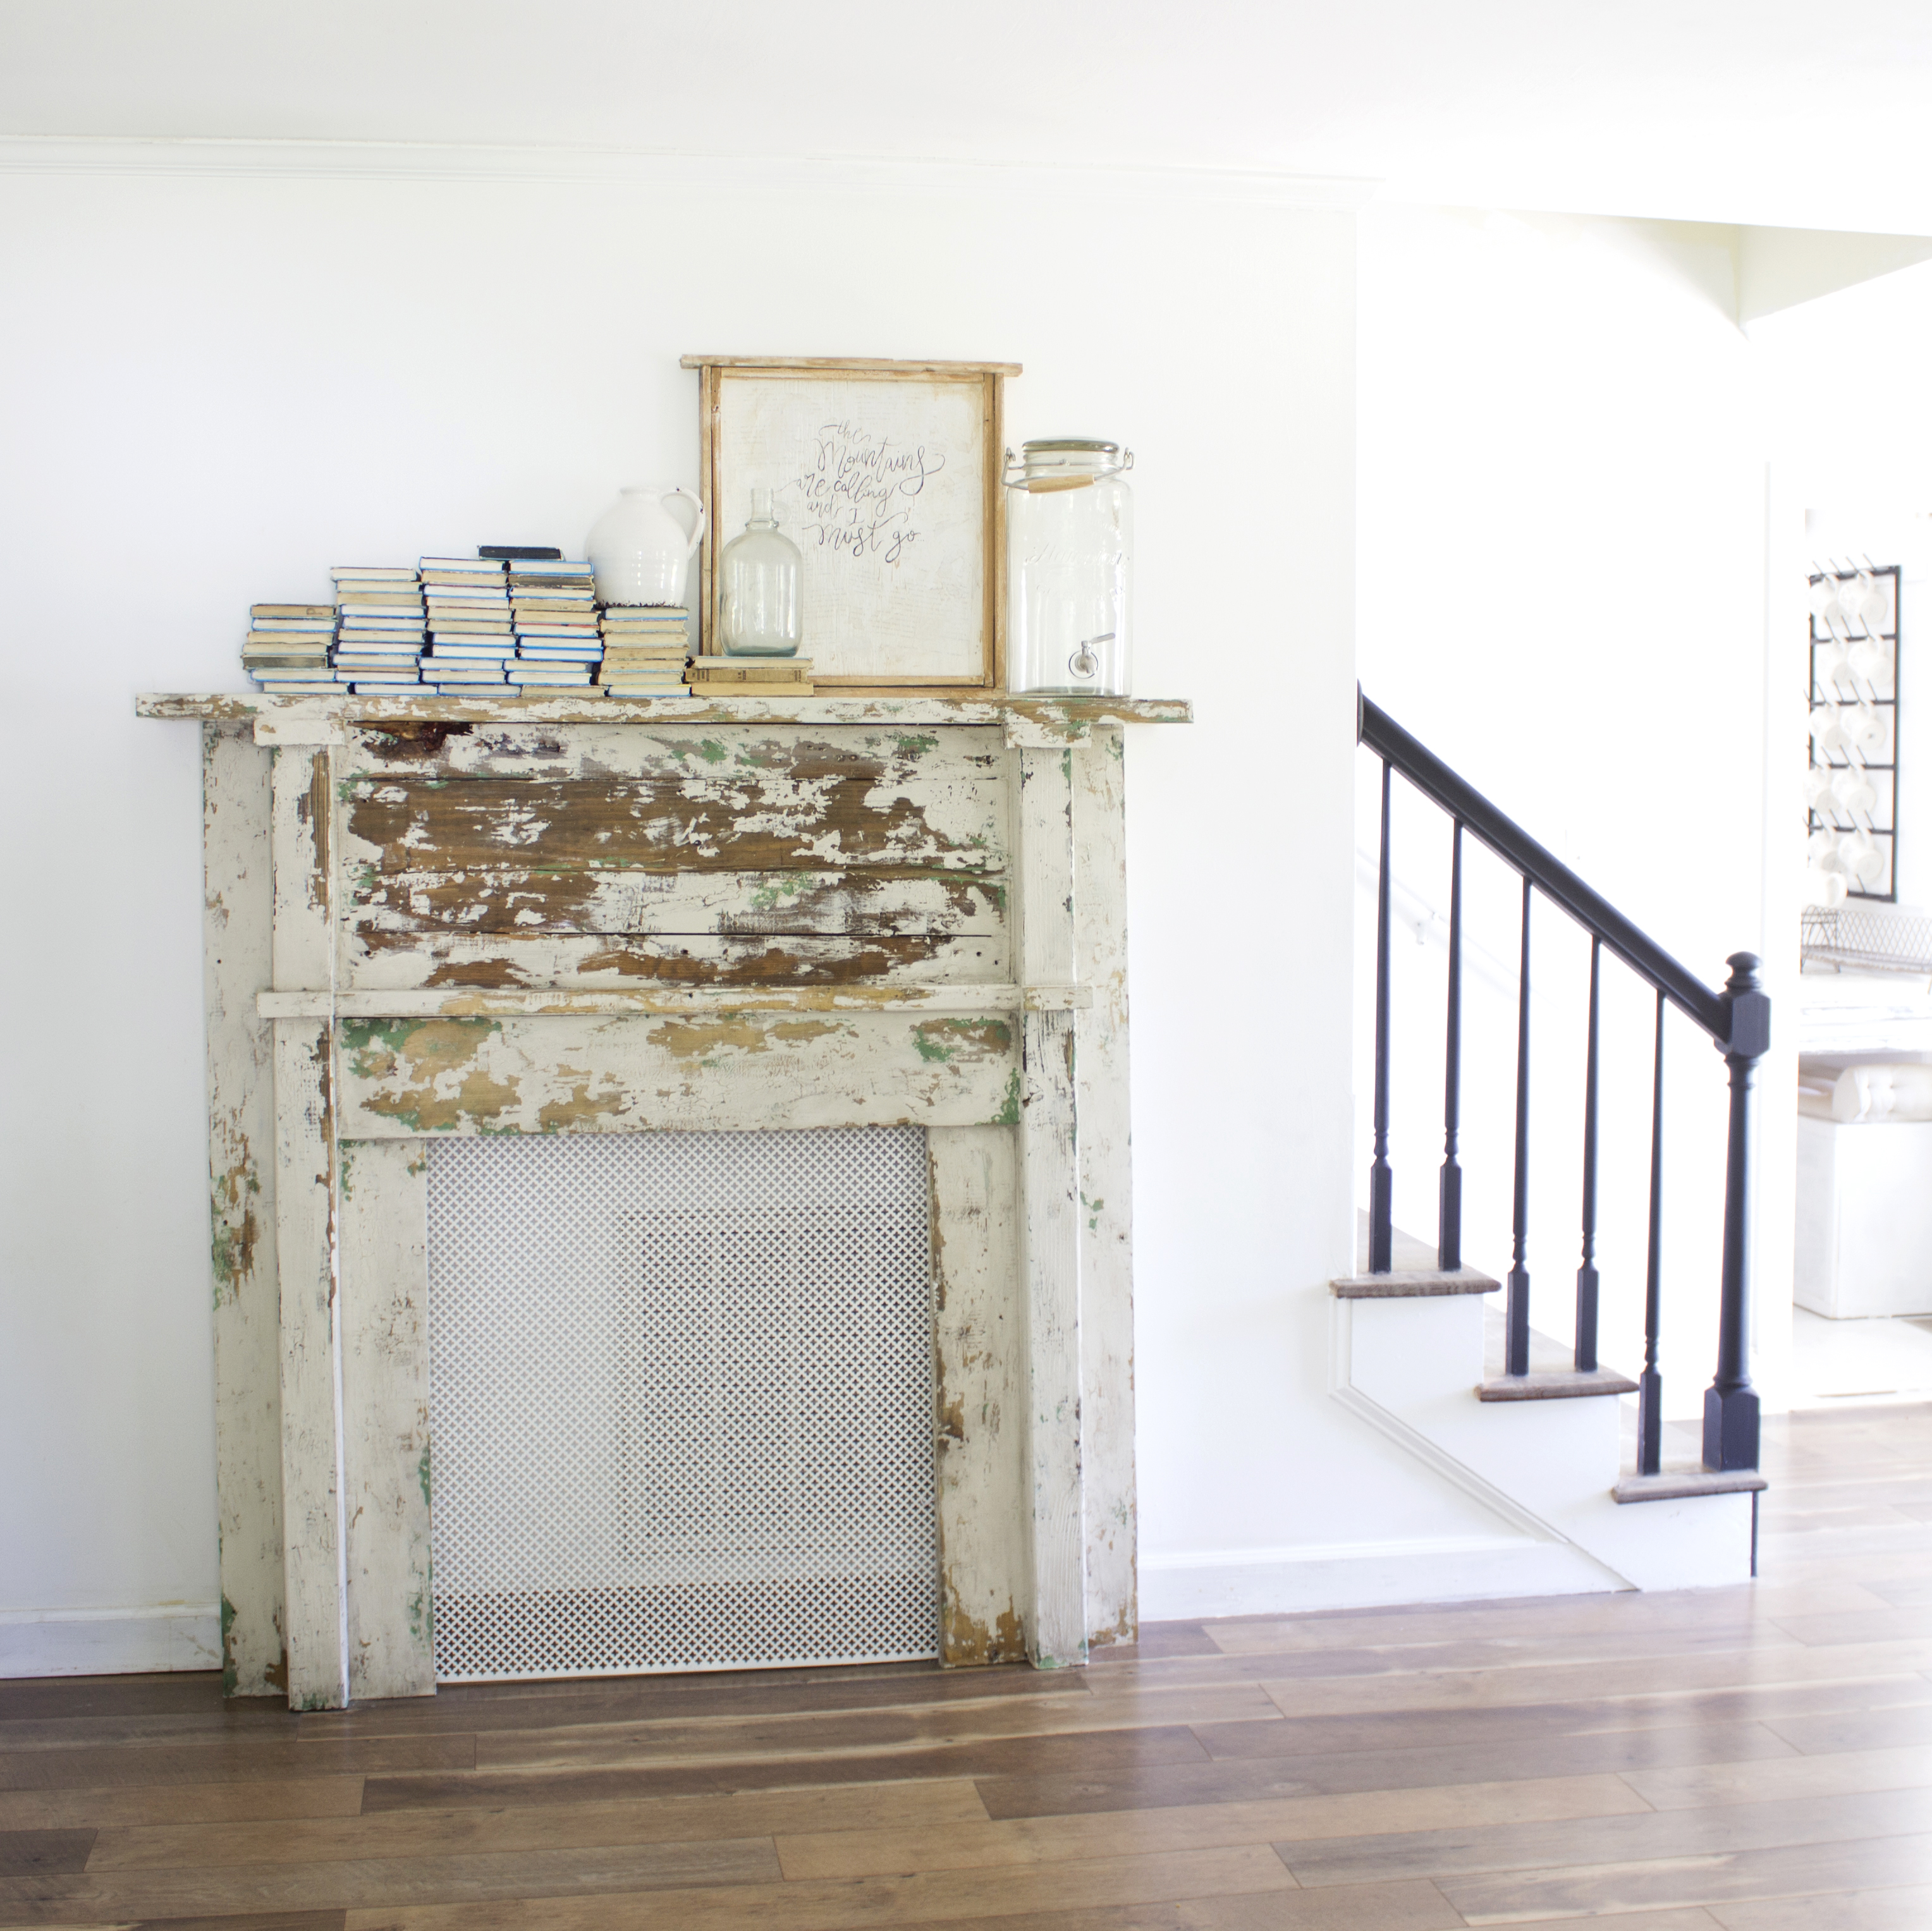 How To Paint DIY An Antique Grunge Patina On A DIY Antique Looking Chippy Historic Fireplace Mantle [With Dixie Belle Chalk Paint].